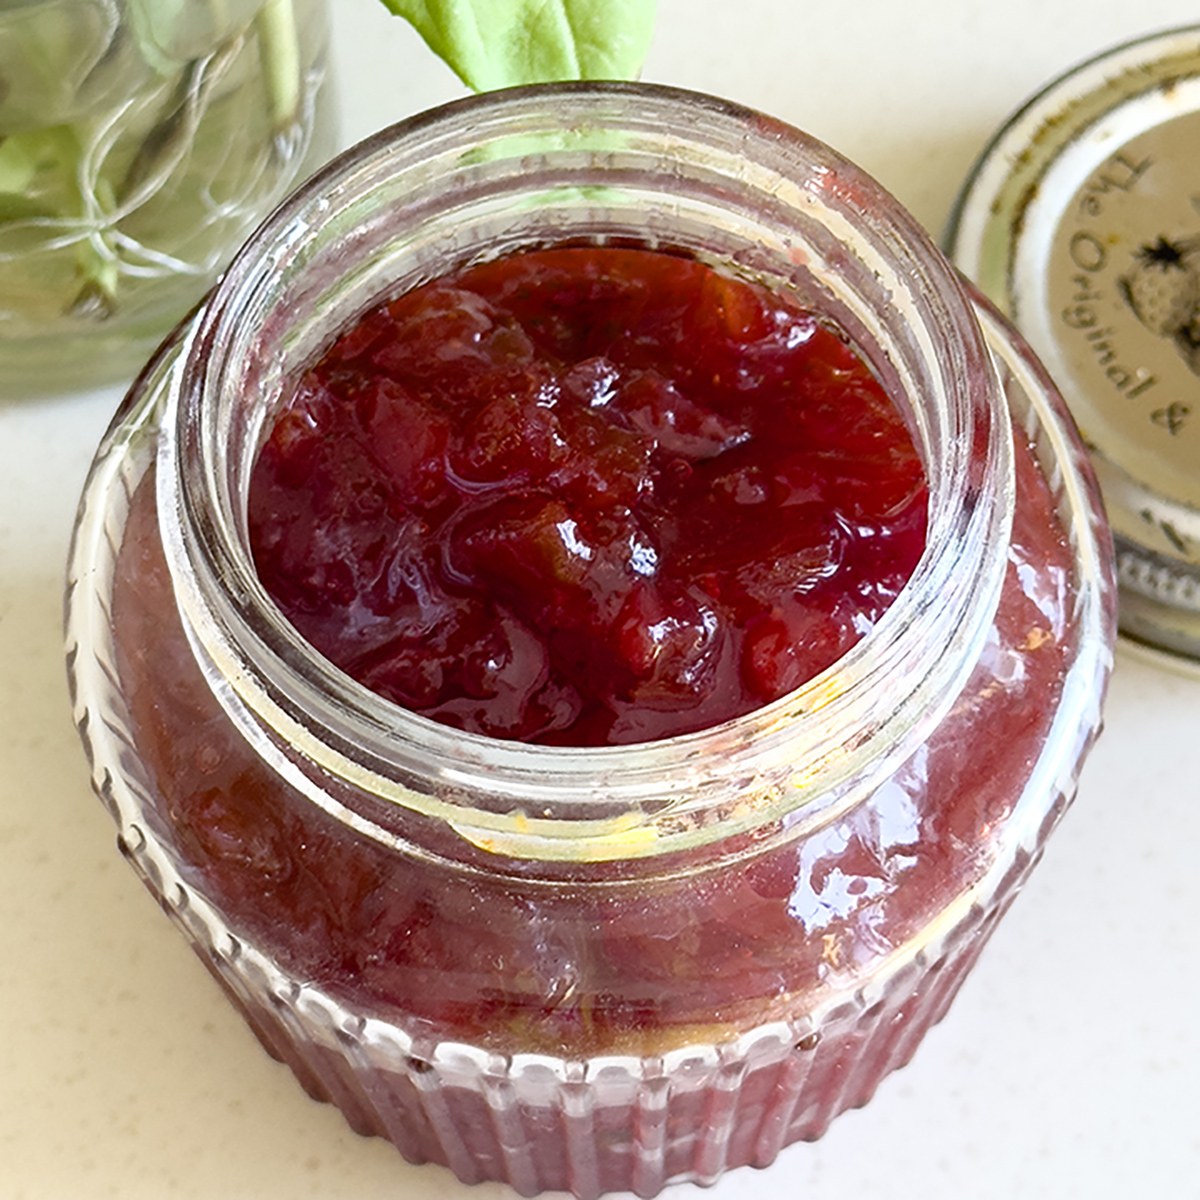 Homemade Strawberry Jam Without Pectin - My Tasty Curry